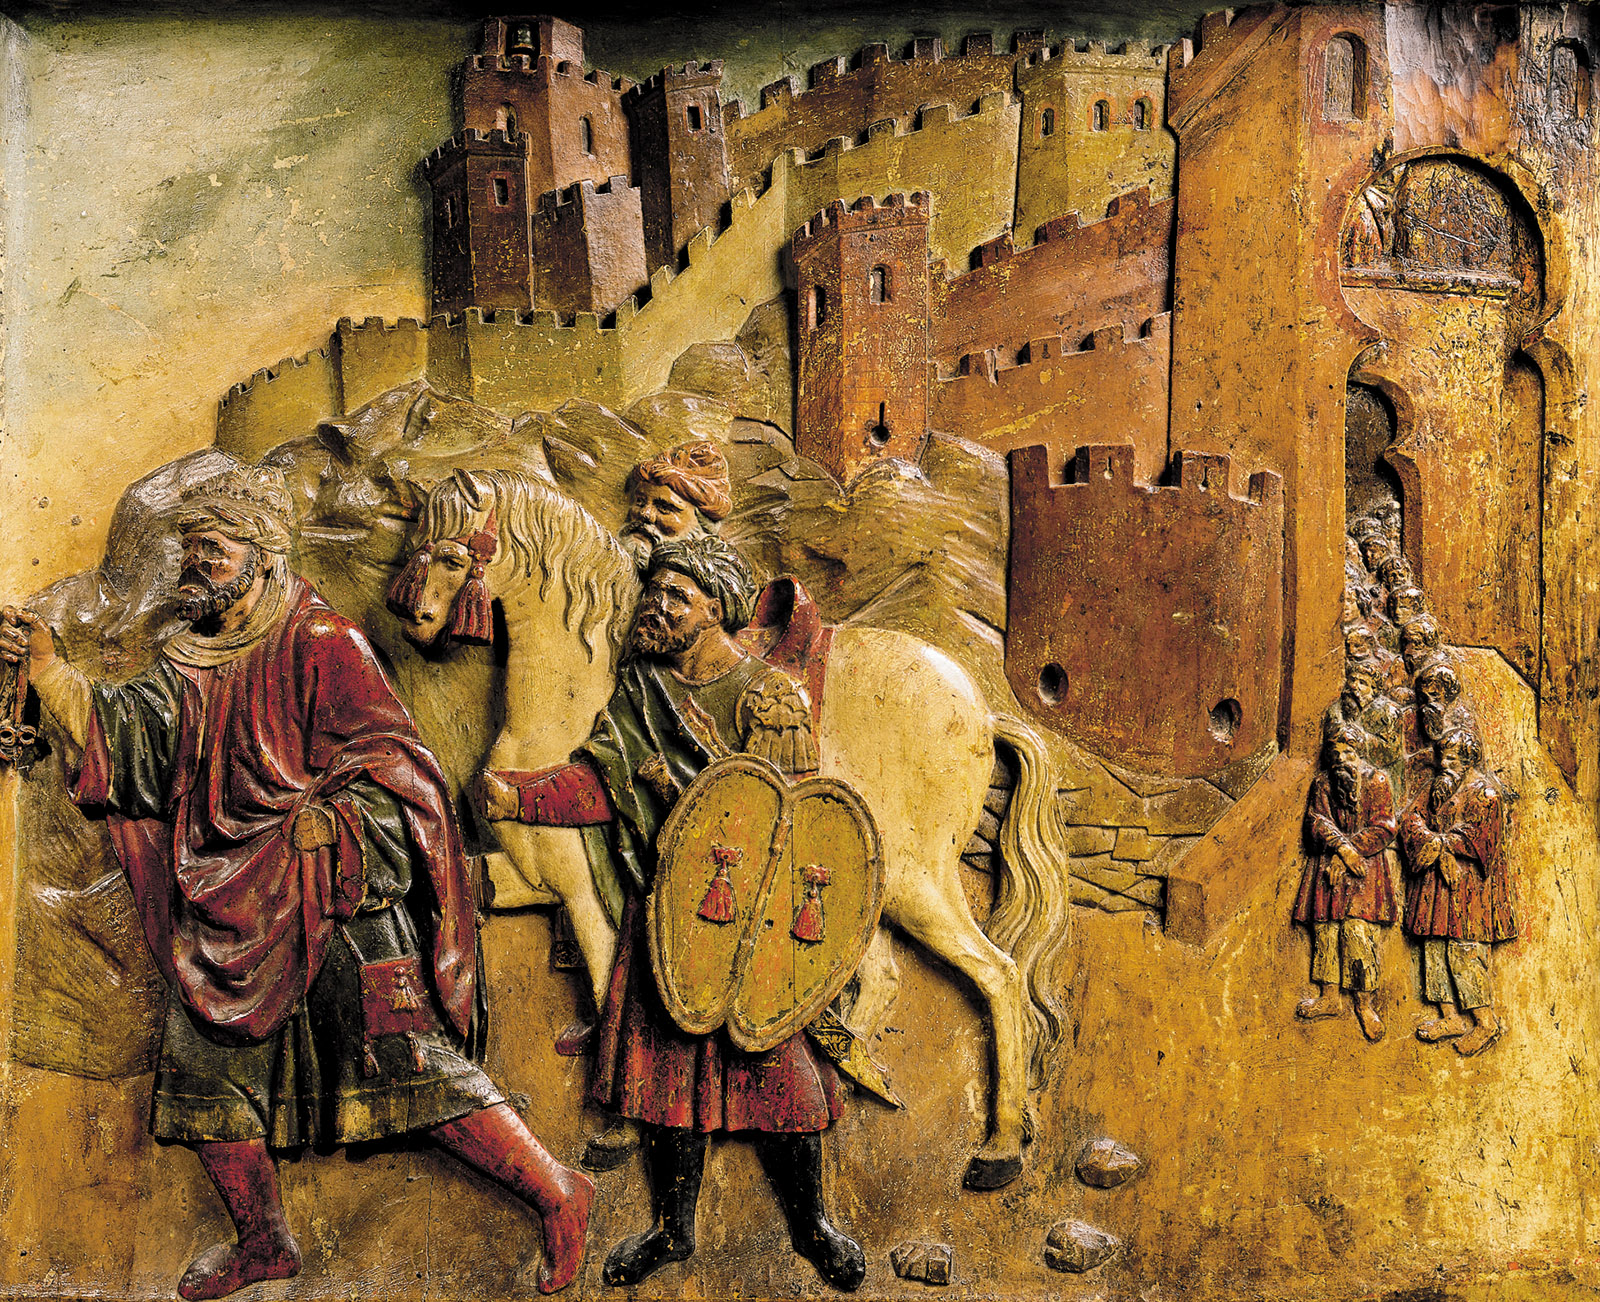 Muhammad XII, also known as Boabdil, the last Muslim ruler of Granada, leaving the city in 1492 after its conquest by Ferdinand and Isabella; detail of an altarpiece in the Royal Chapel of the Cathedral of Granada, sixteenth century